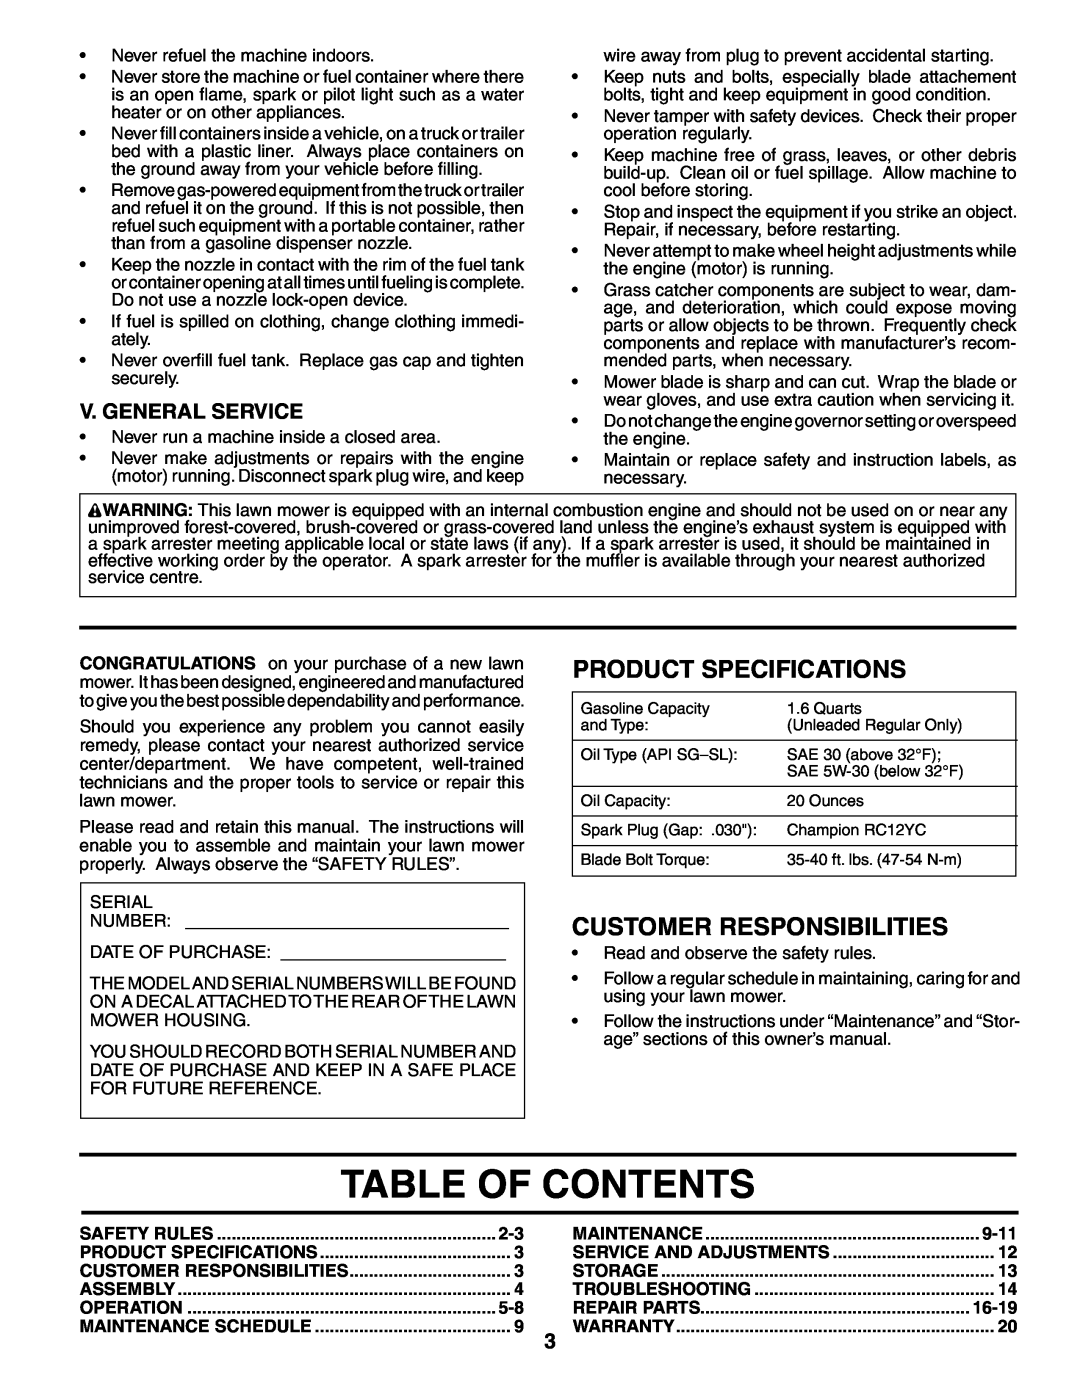 Husqvarna 7021CH1 Table Of Contents, Product Specifications, Customer Responsibilities, V. General Service, 9-11, 16-19 